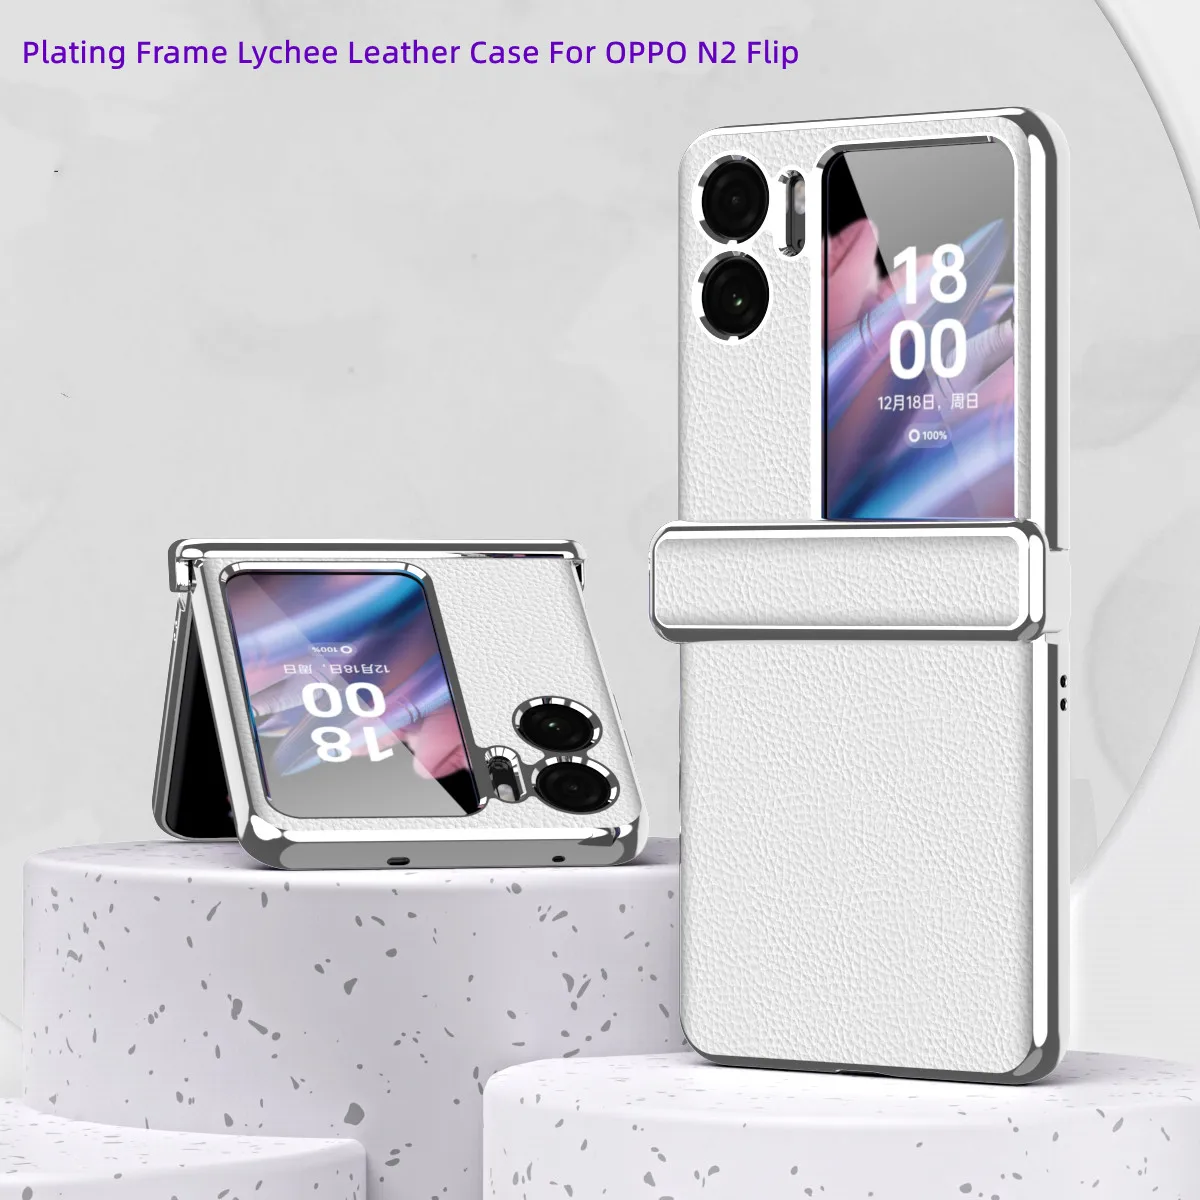 

Plating Frame Lychee Leather Case For OPPO N2 Flip,Made Of Cosy Cobbled Leather,Magnetic Hinge Comes With Screen Protection